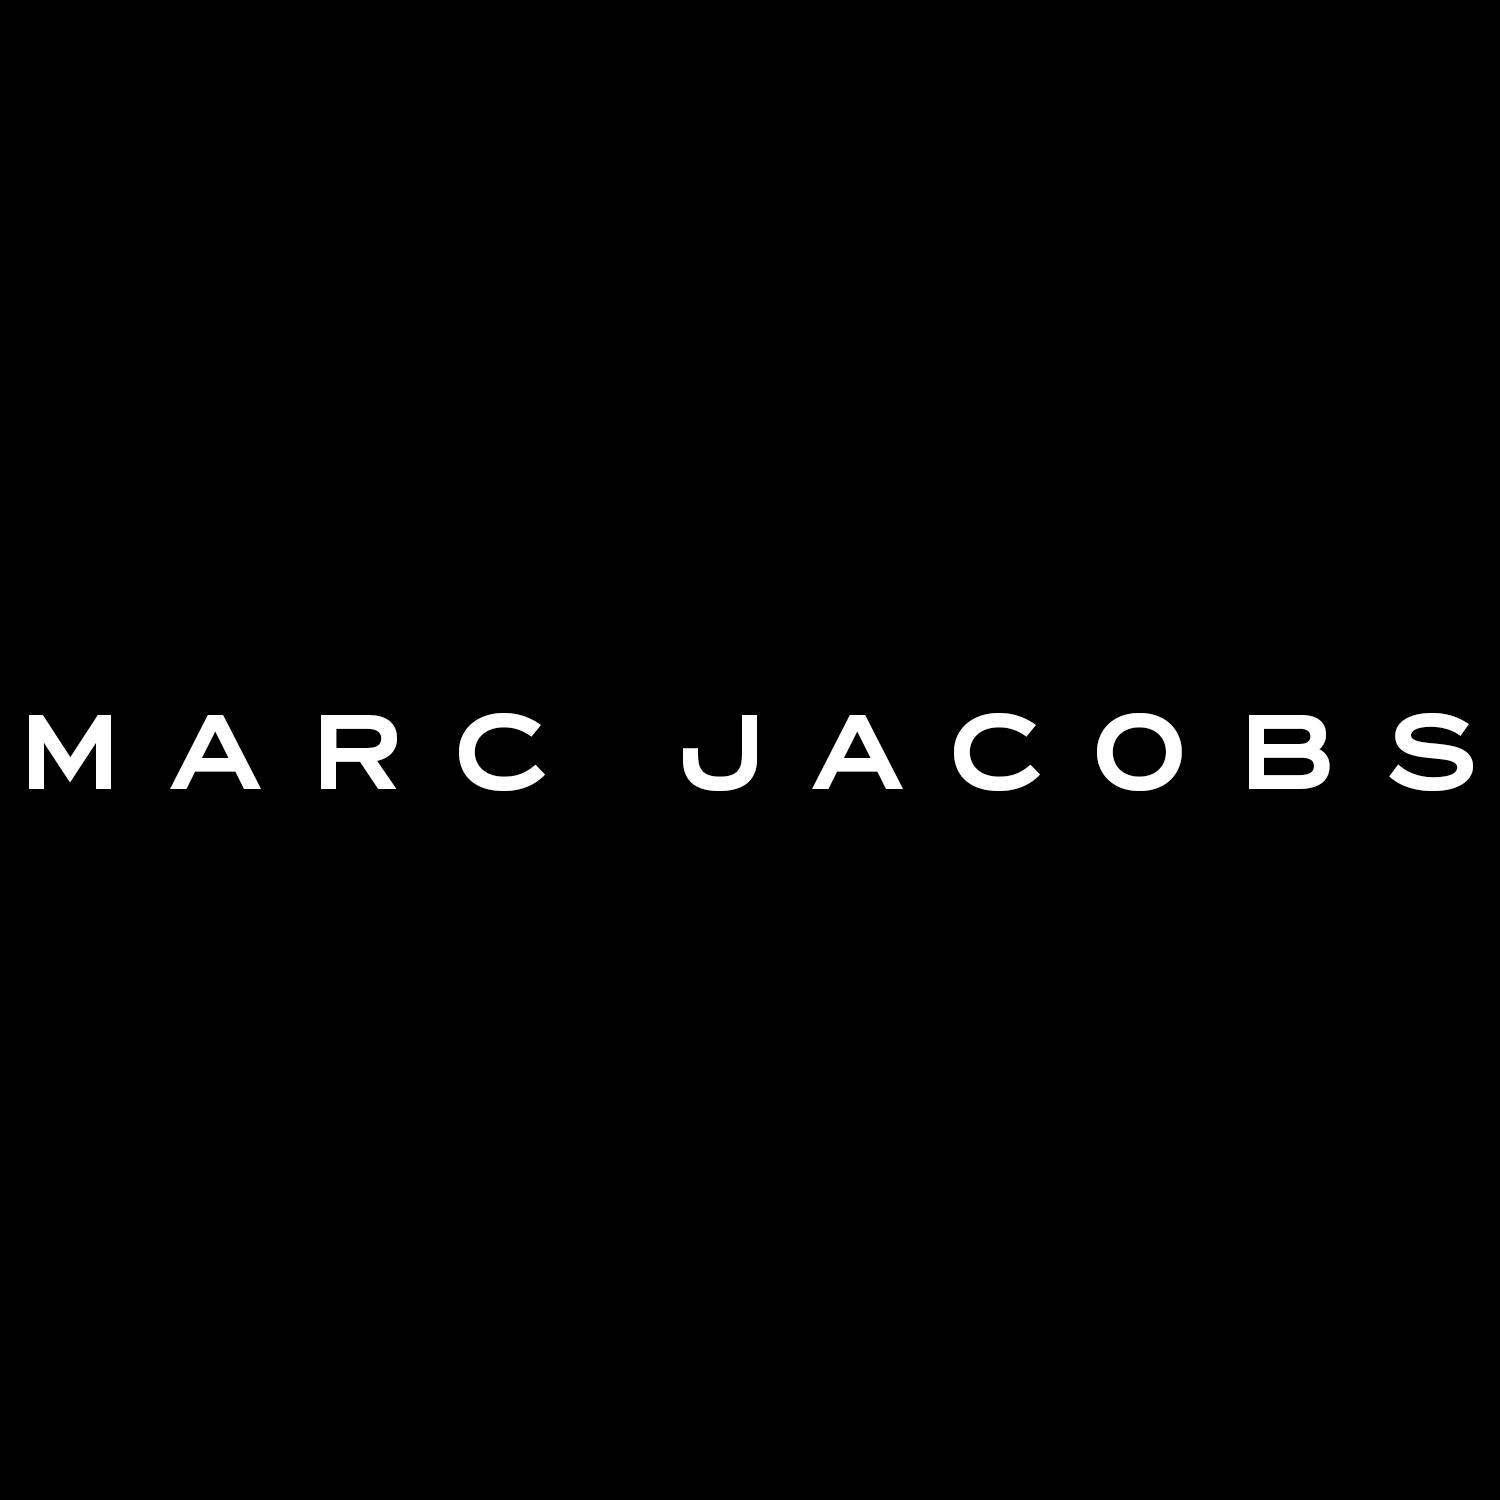 Marc Jacobs Logo - Marc by marc jacobs Logos